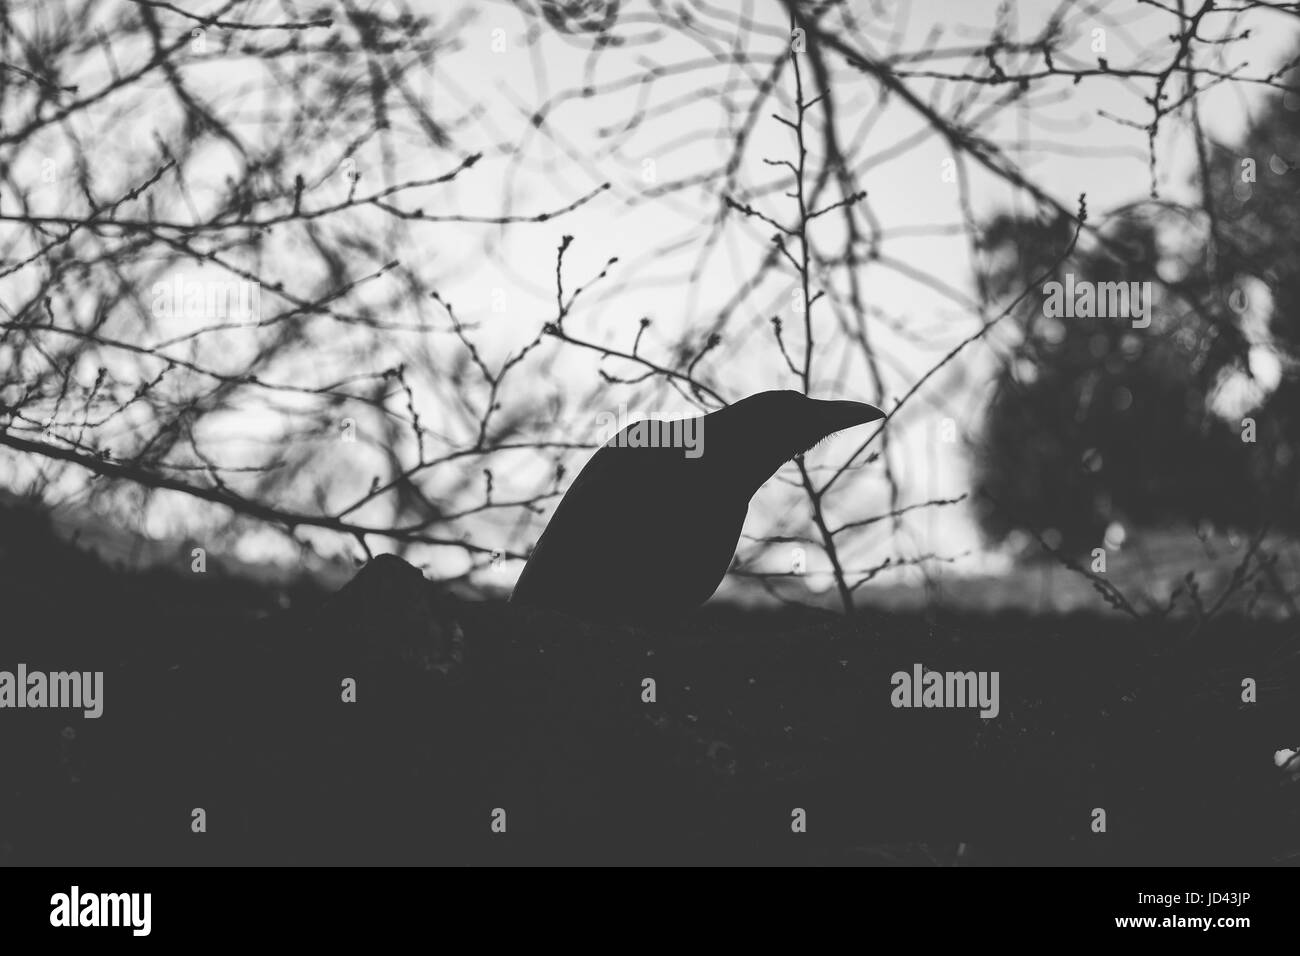 Silhouette of black creepy crow with tree branch in the background. Stock Photo